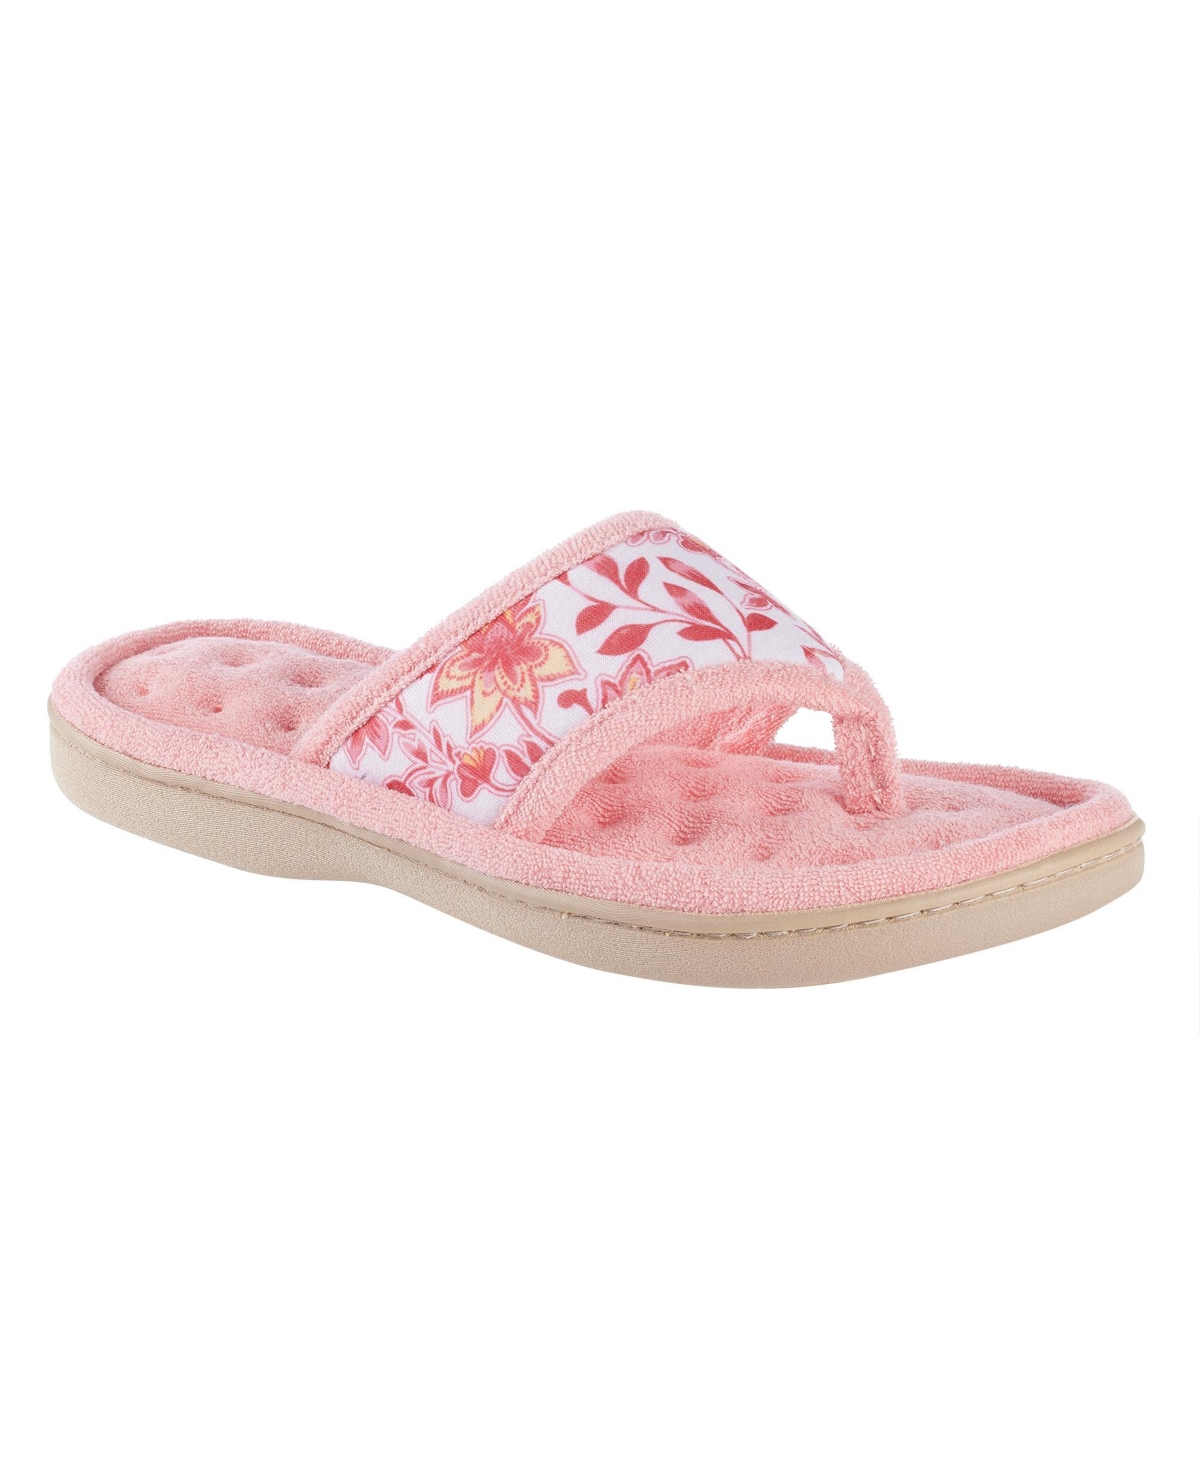 Women's Georgie Floral Print Thong Slippers - Iced Strawberry